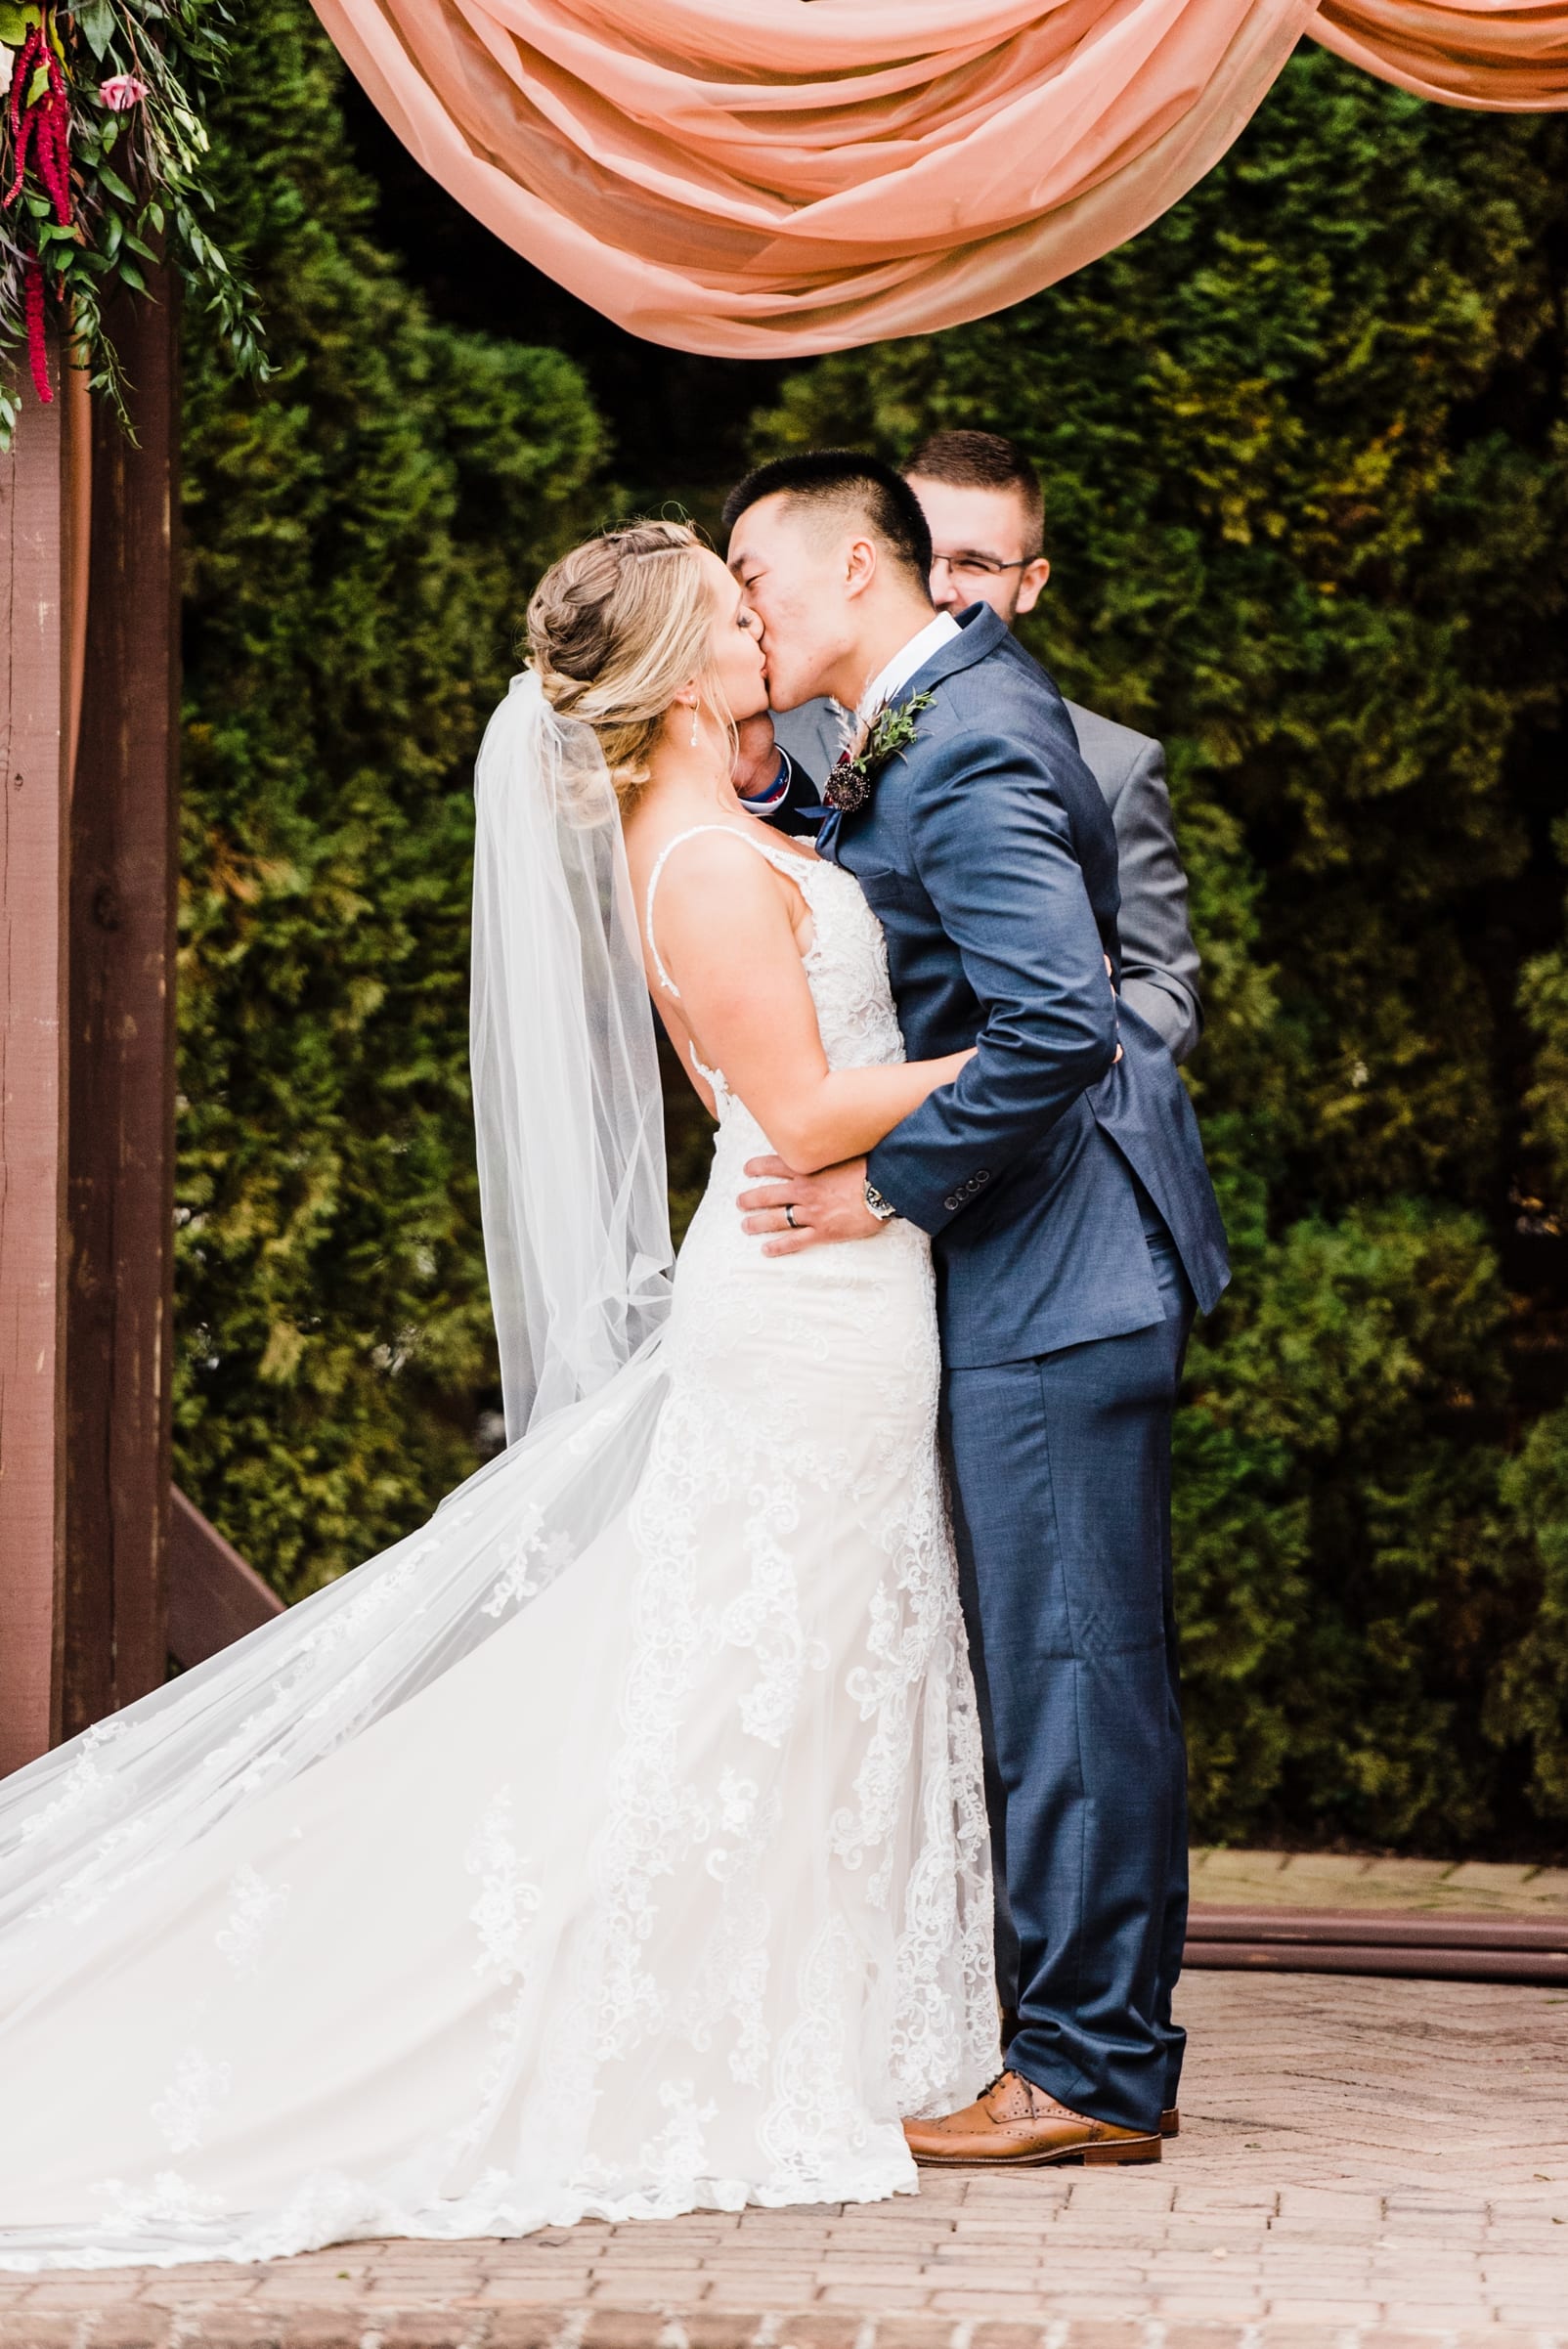 sutherland estate and gardens wedding photographer first kiss wedding dress inspiration ceremony with floral arbor photo